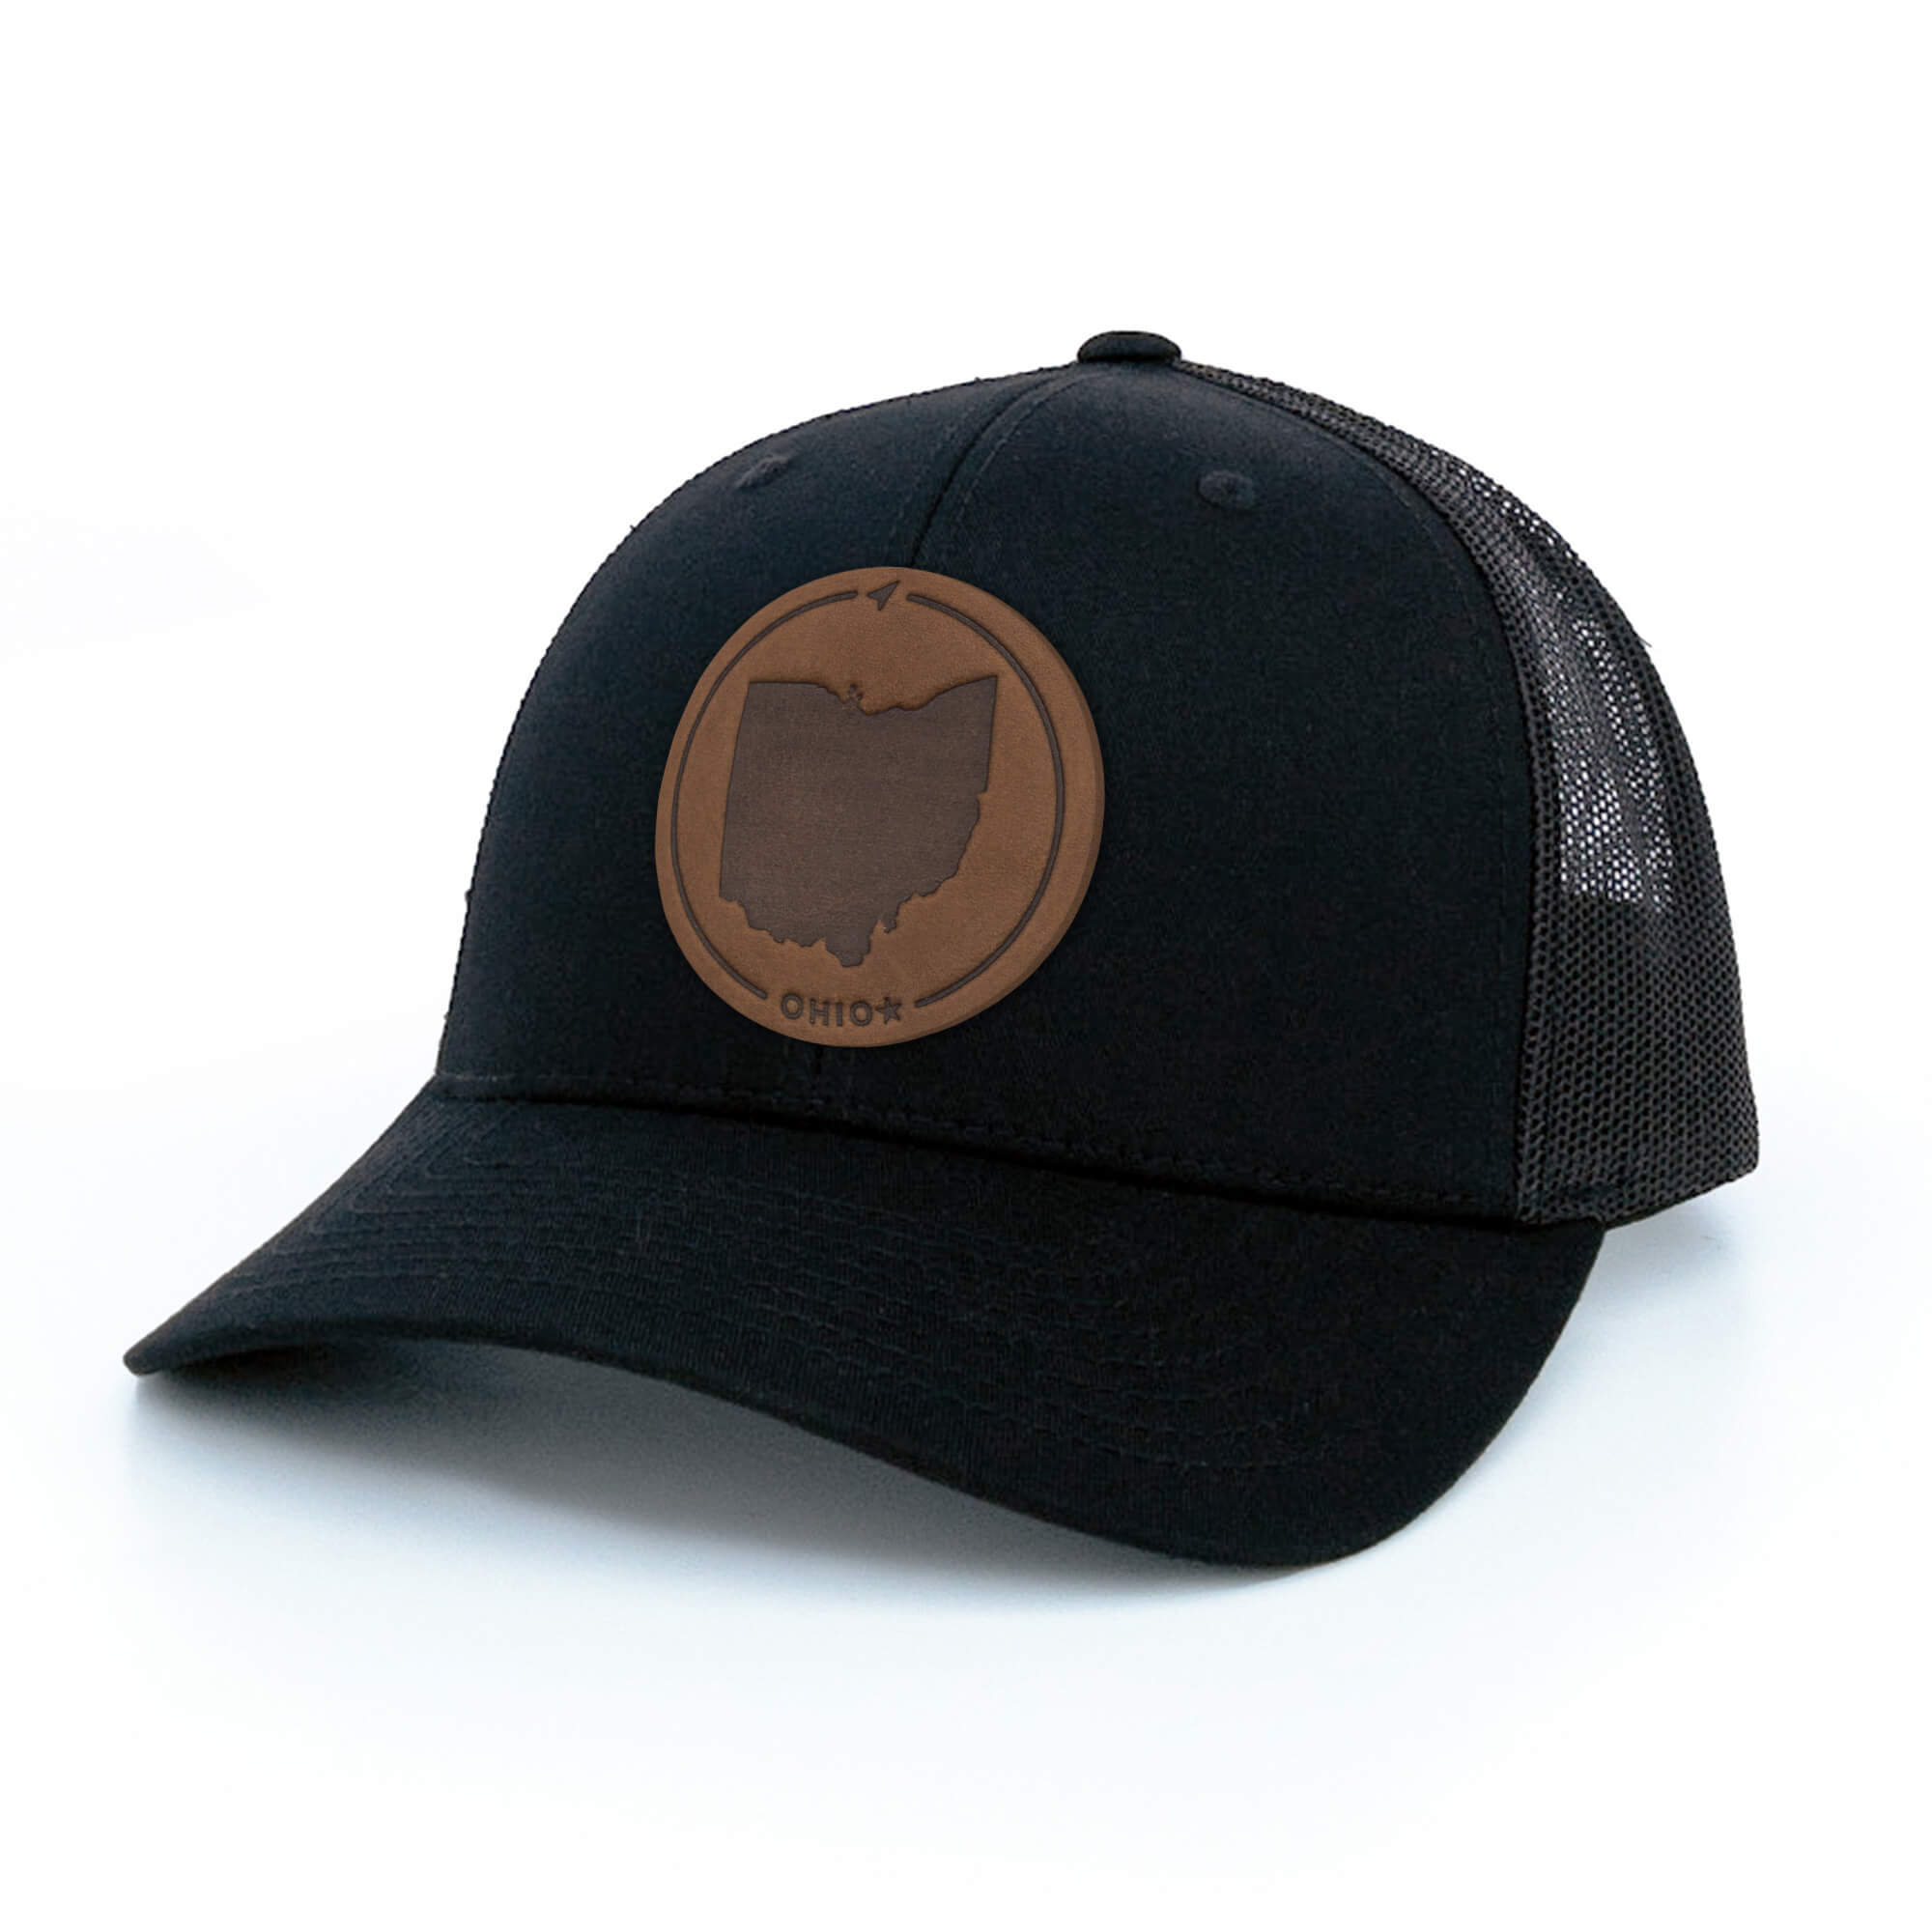 Black trucker hat with full-grain leather patch of Ohio | BLACK-003-004, CHARC-003-004, NAVY-003-004, HGREY-003-004, MOSS-003-004, BROWN-003-004